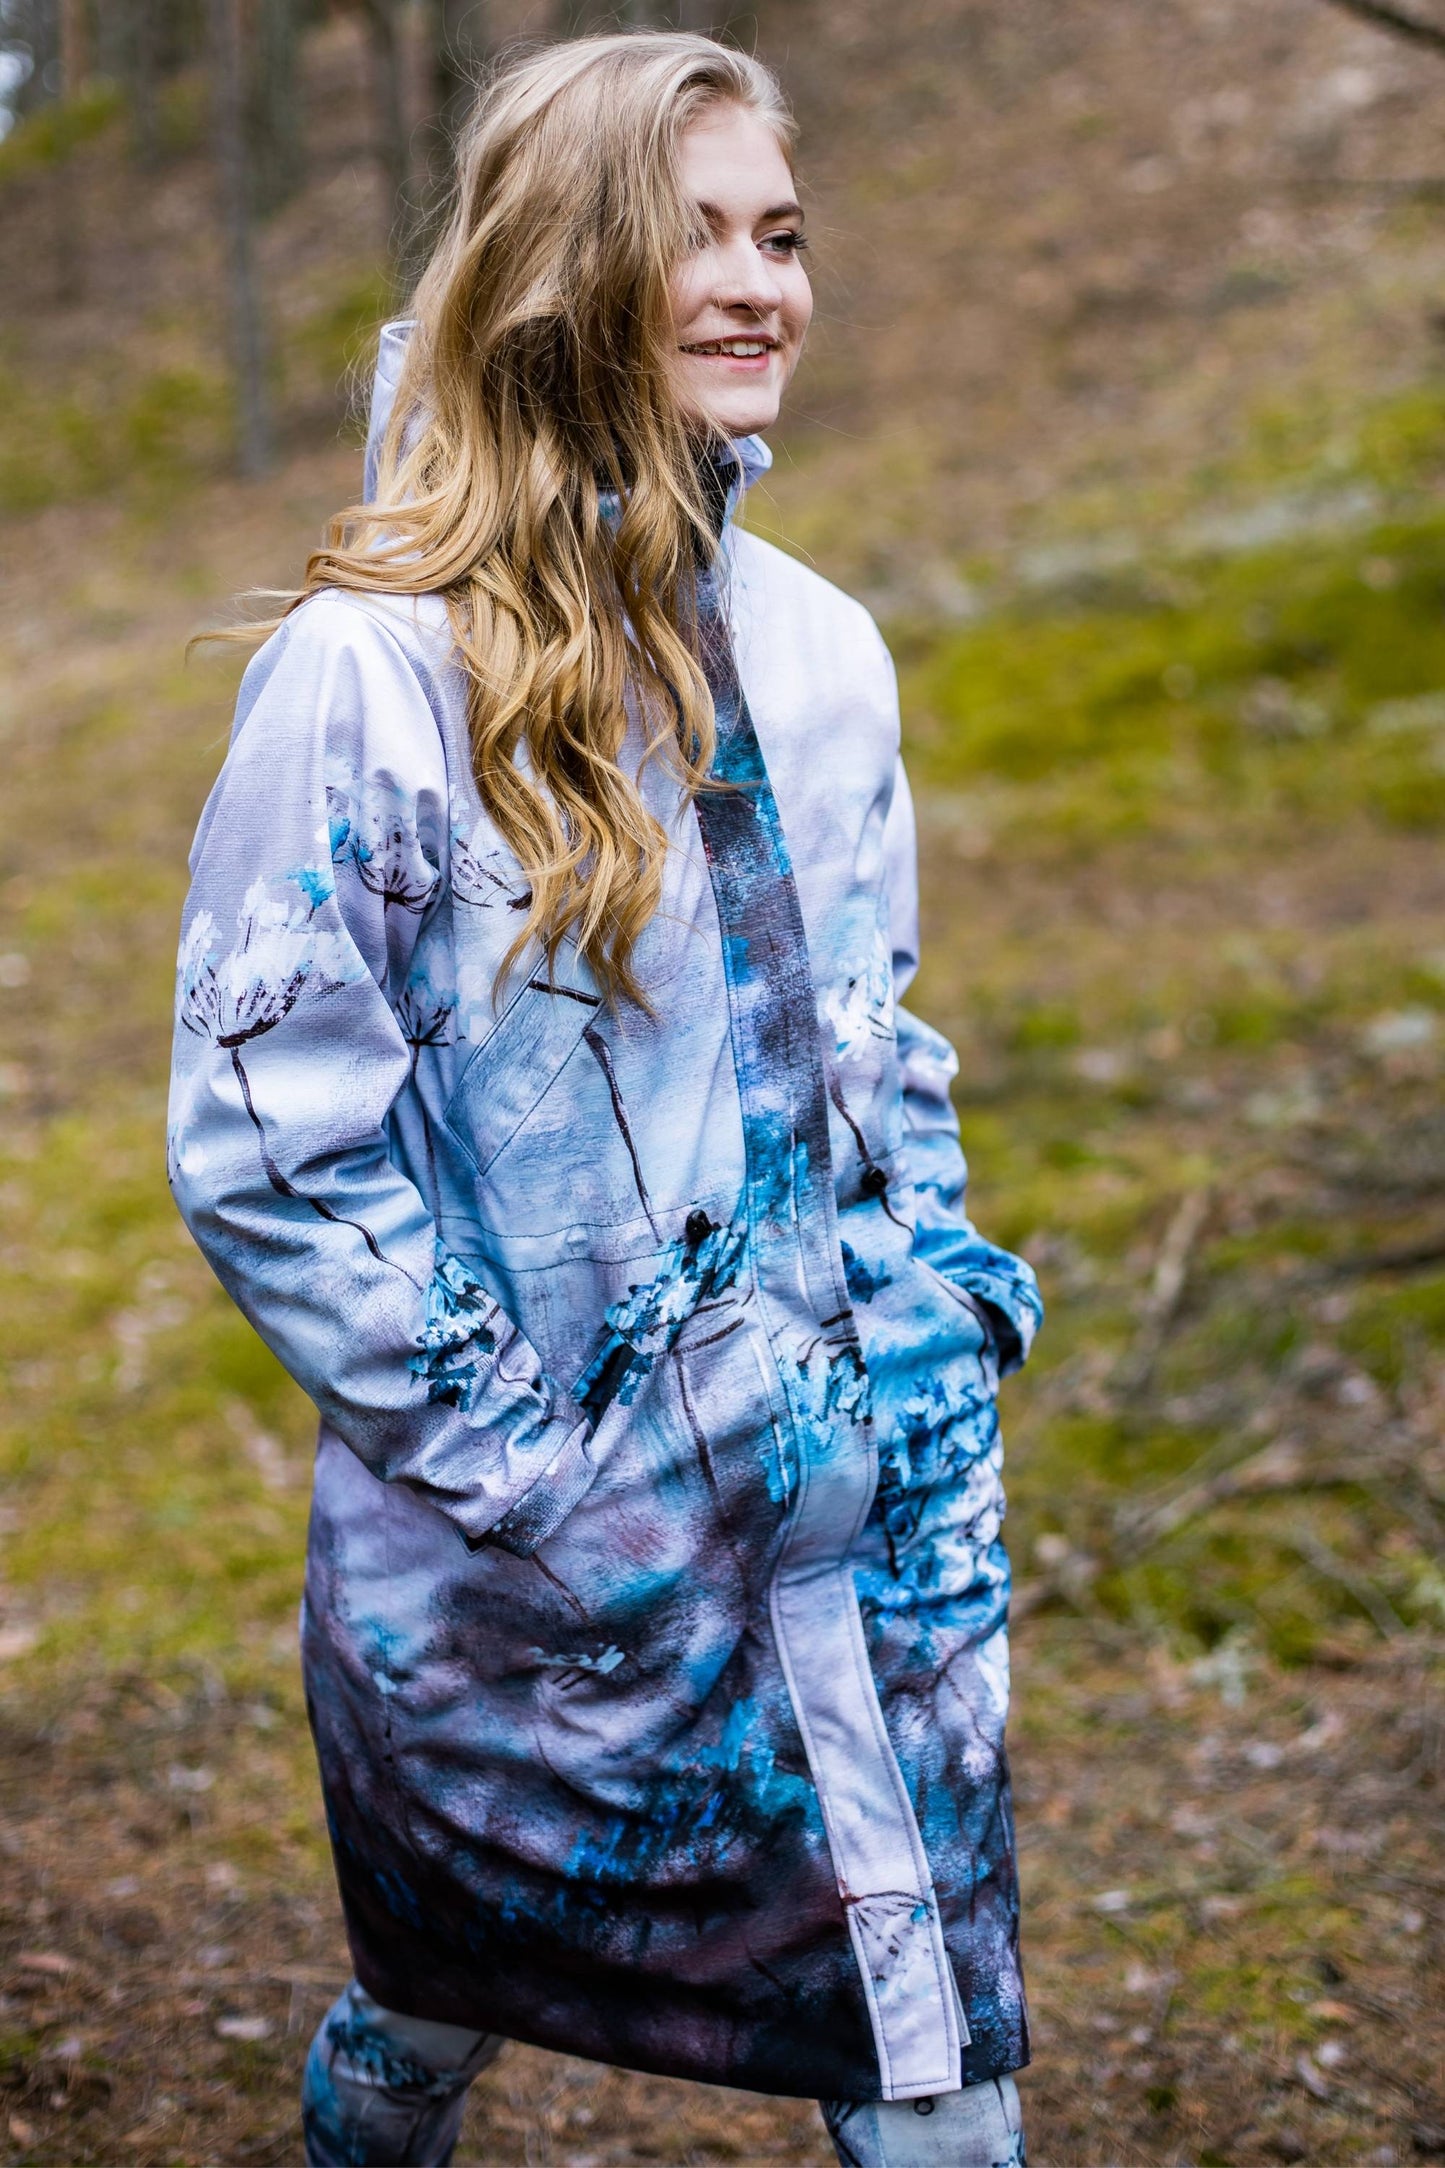 Softshell coat / parka with blue and white floral print